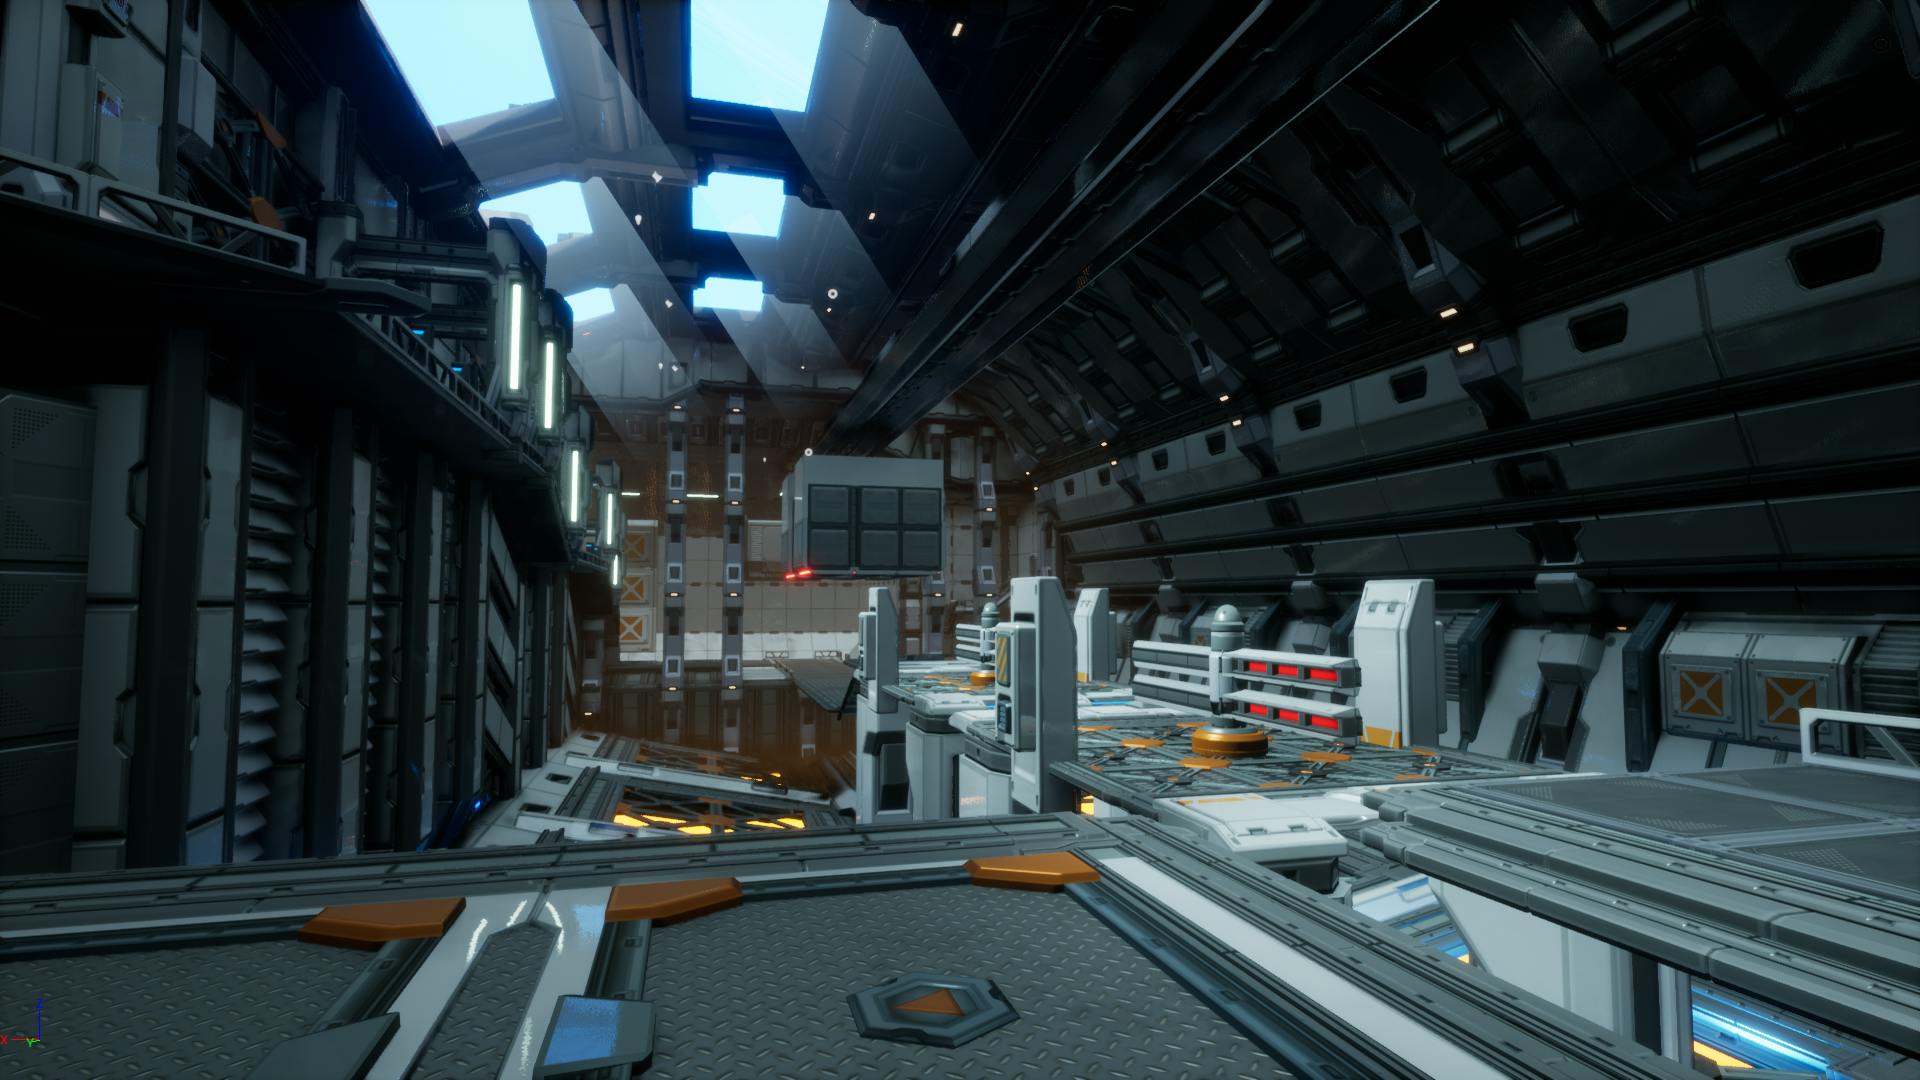 Above: Players might not have time to stop and admire the sci-fi trappings of Morticai's "Hazard Pay - Death Run" as they race to avoid certain doom at the hands of their fellow players.